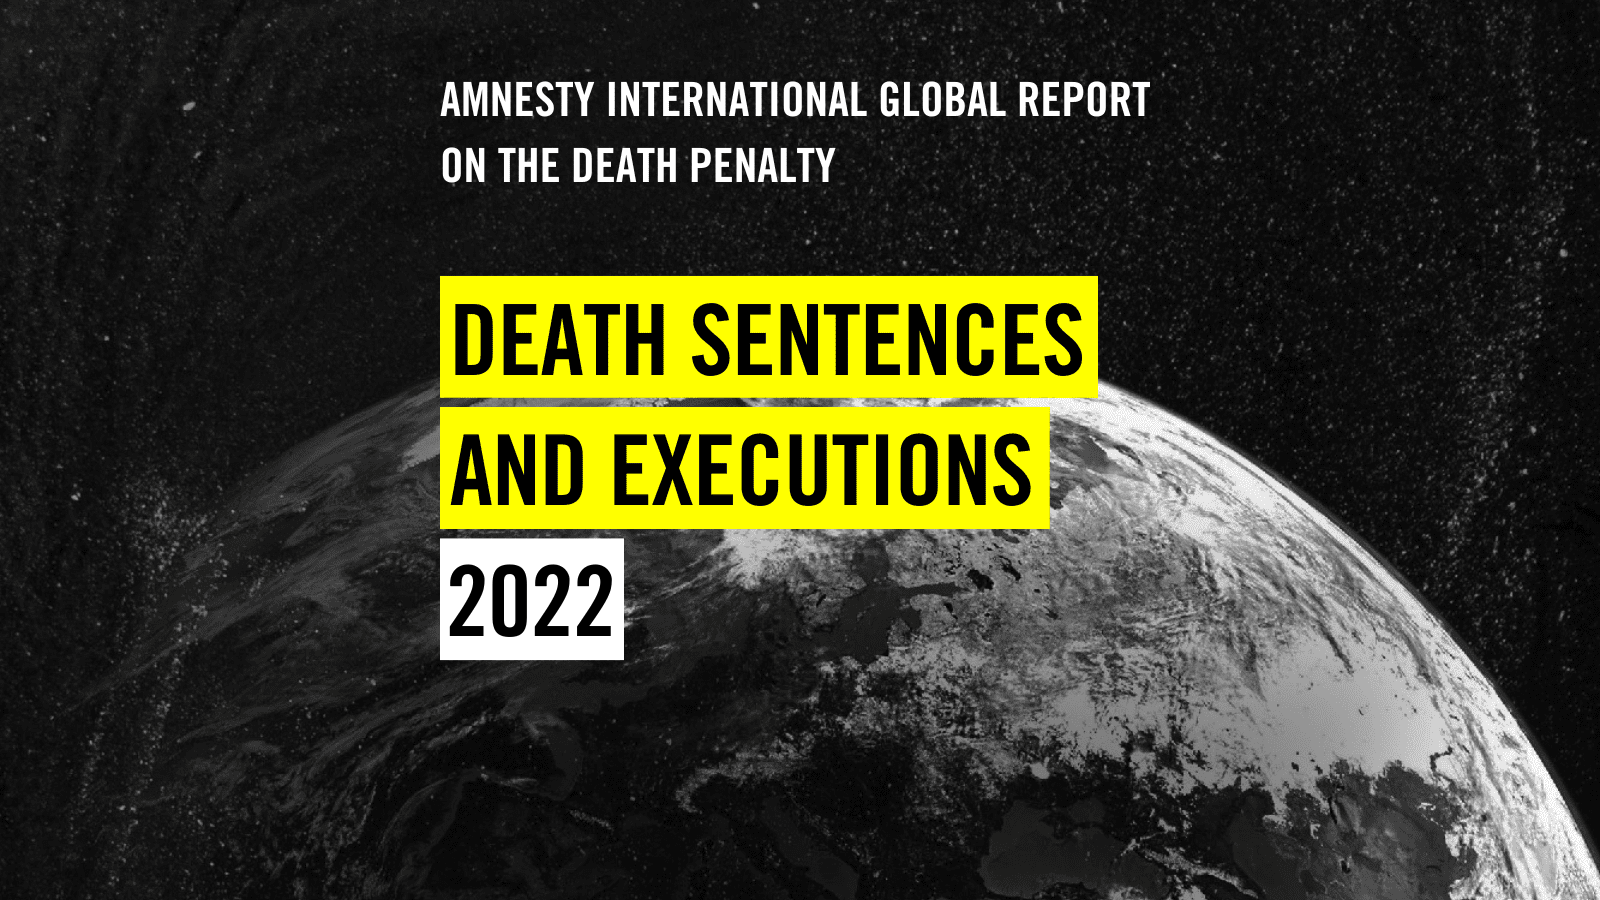 DEATH SENTENCES AND EXECUTIONS 2022 Amnesty Malaysia